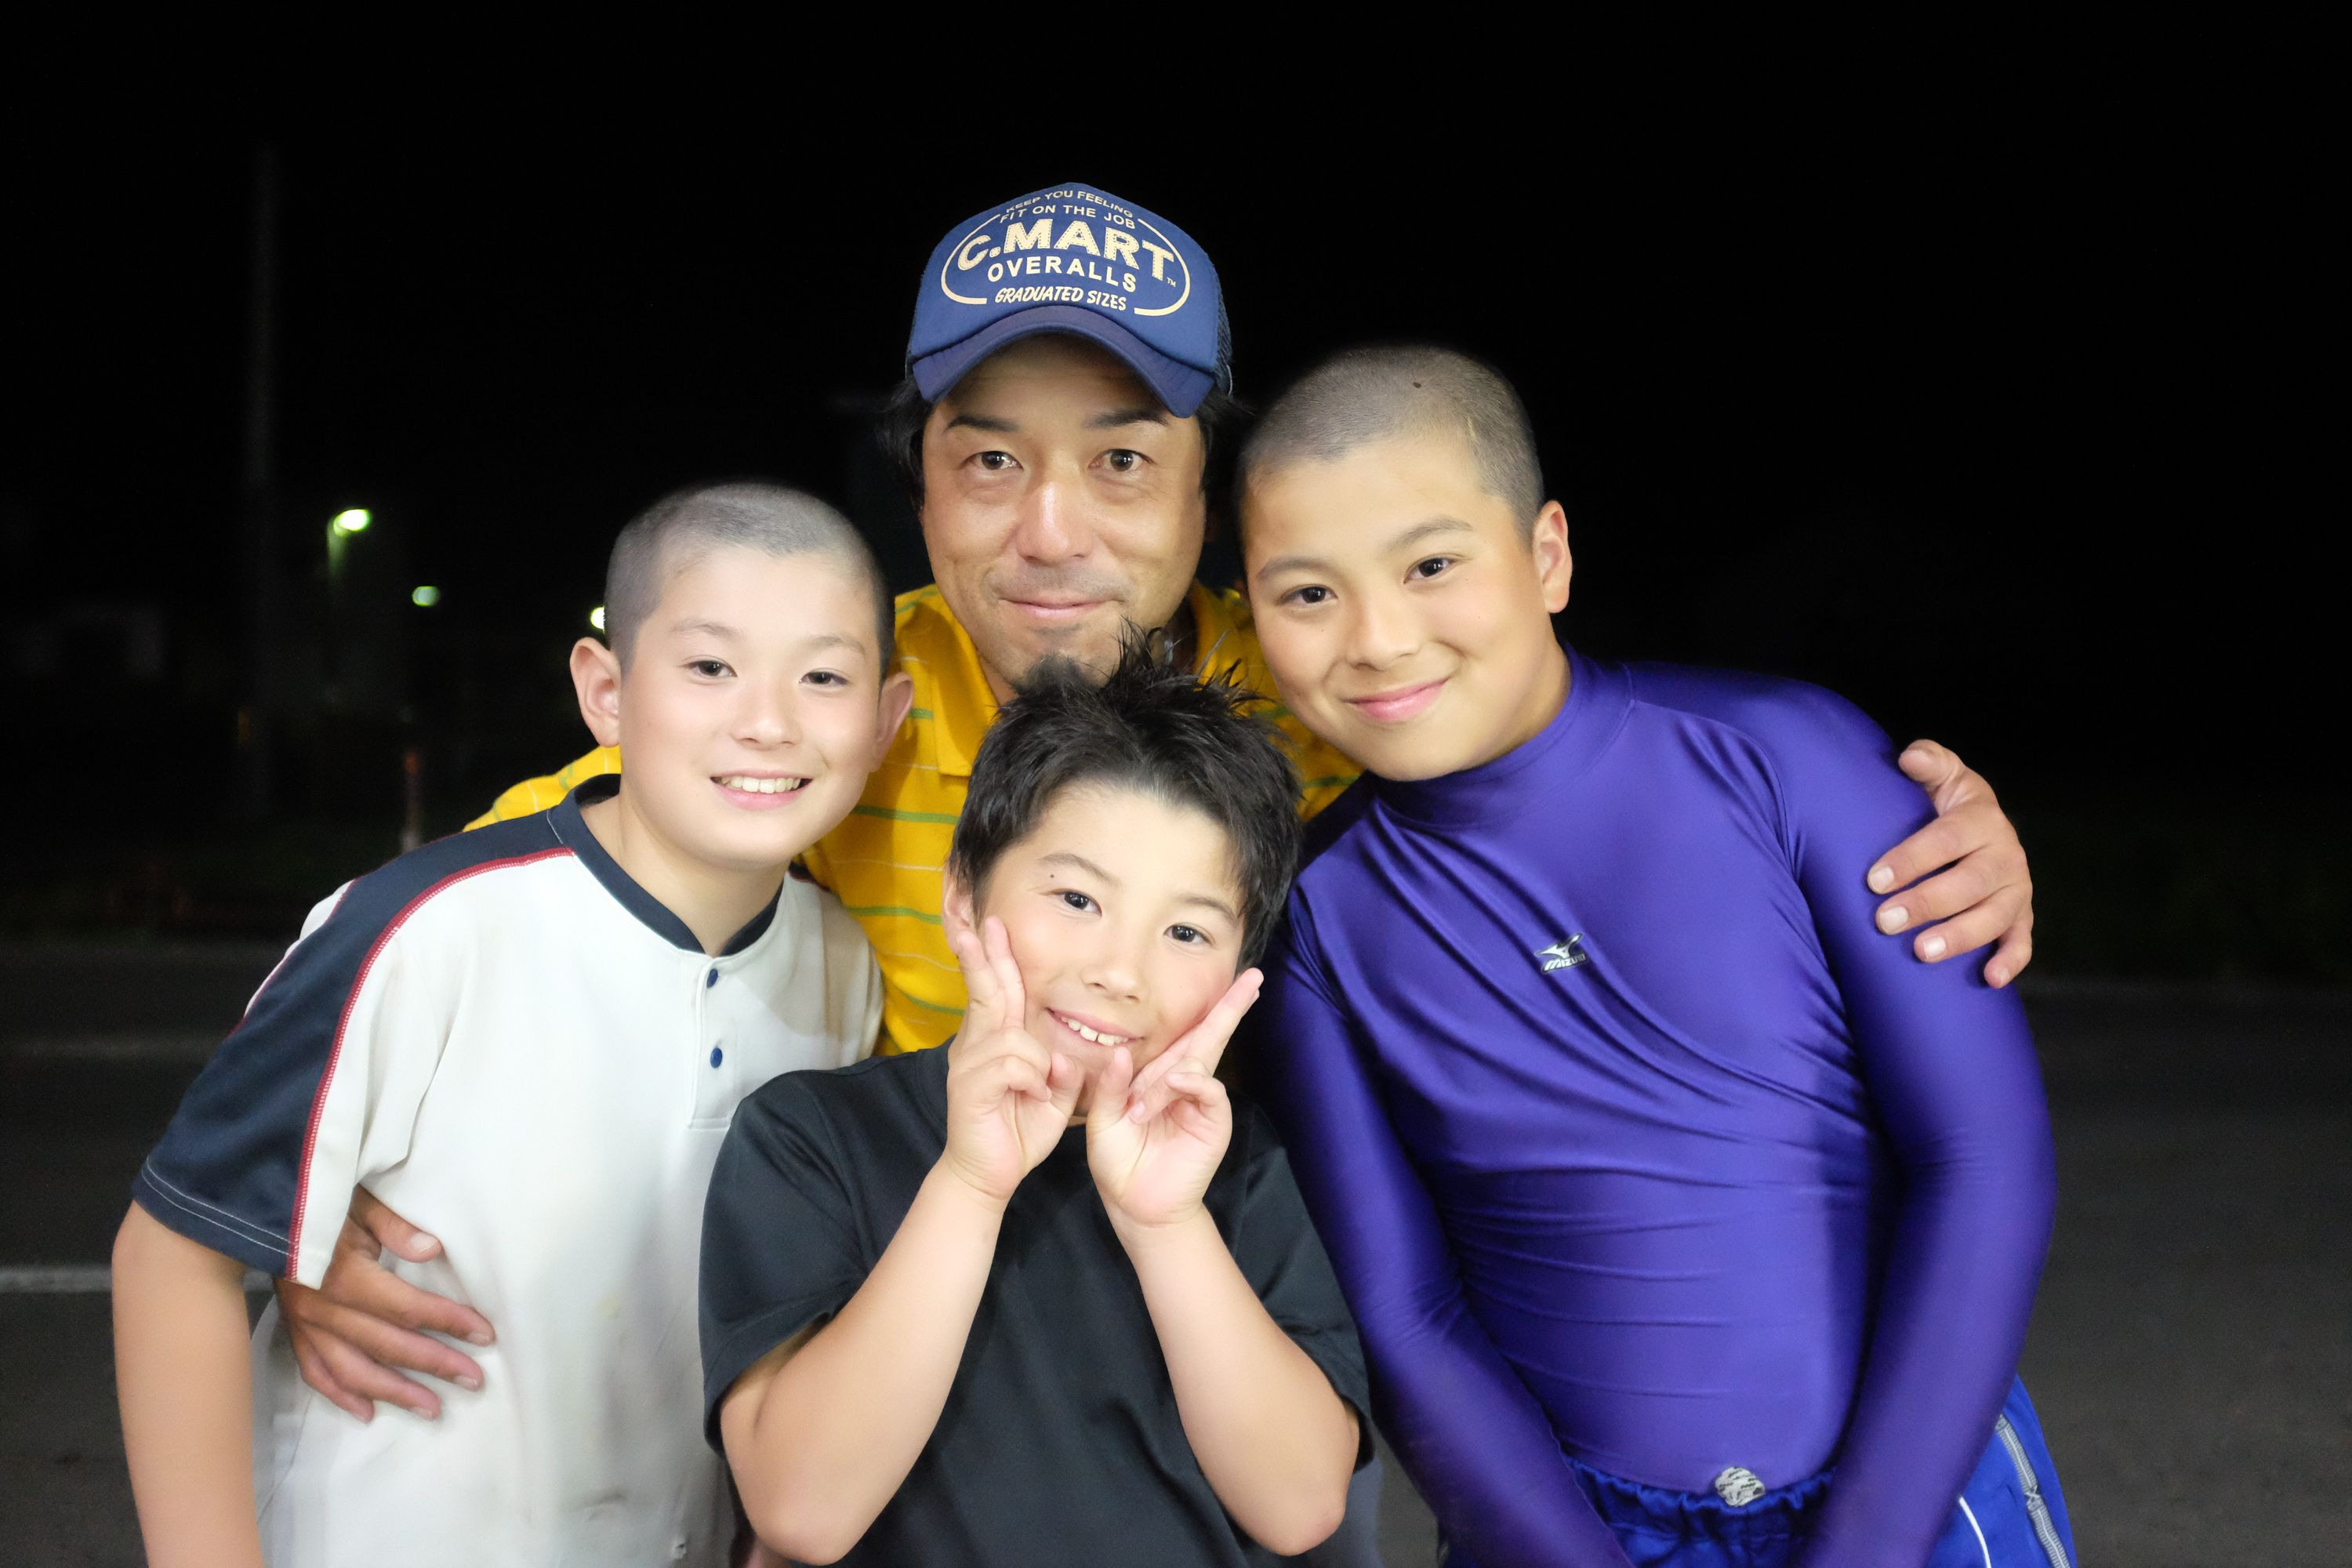 A Japanese man, Mr. Takamori, poses for the camera in the night with his three sons.